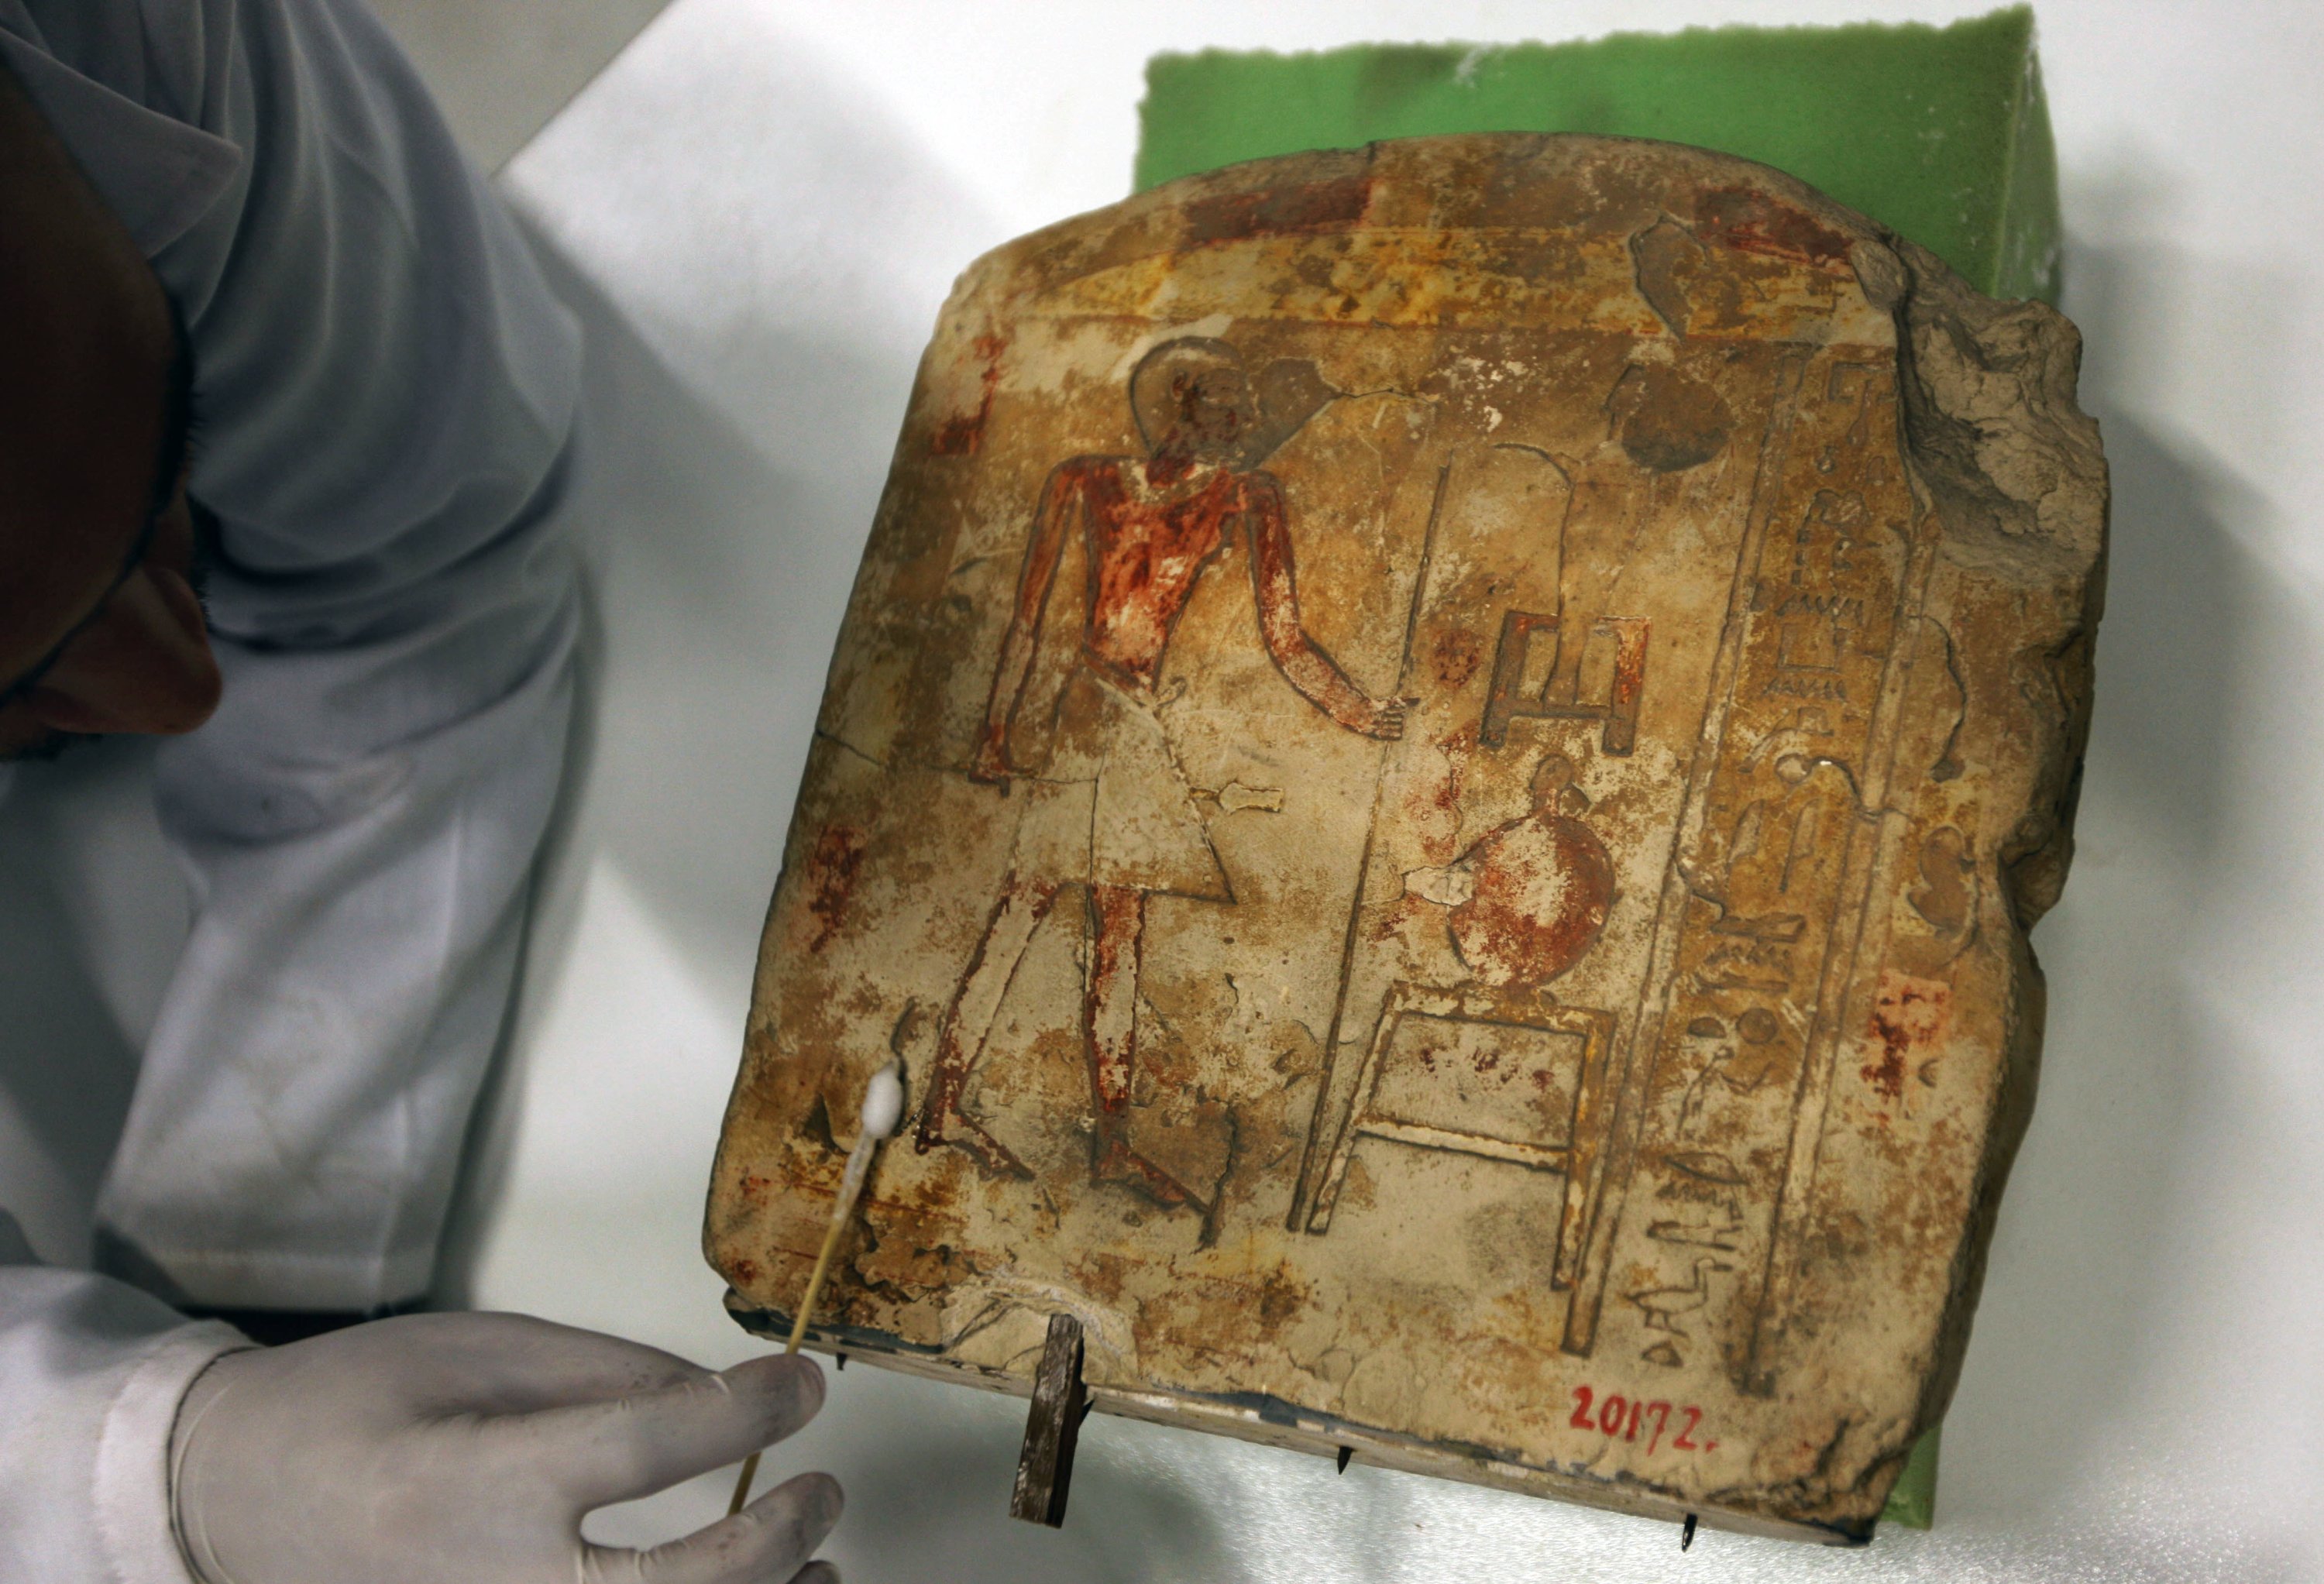 An Egyptian archaeologist works on a pharaonic late                period round-topped stela of Sobck Nakht in the stone                laboratory of the newly opened restoration center of the                partially opened complex of the Grand Egyptian Museum in                Cairo, Egypt, June 16, 2010. (AP Photo)